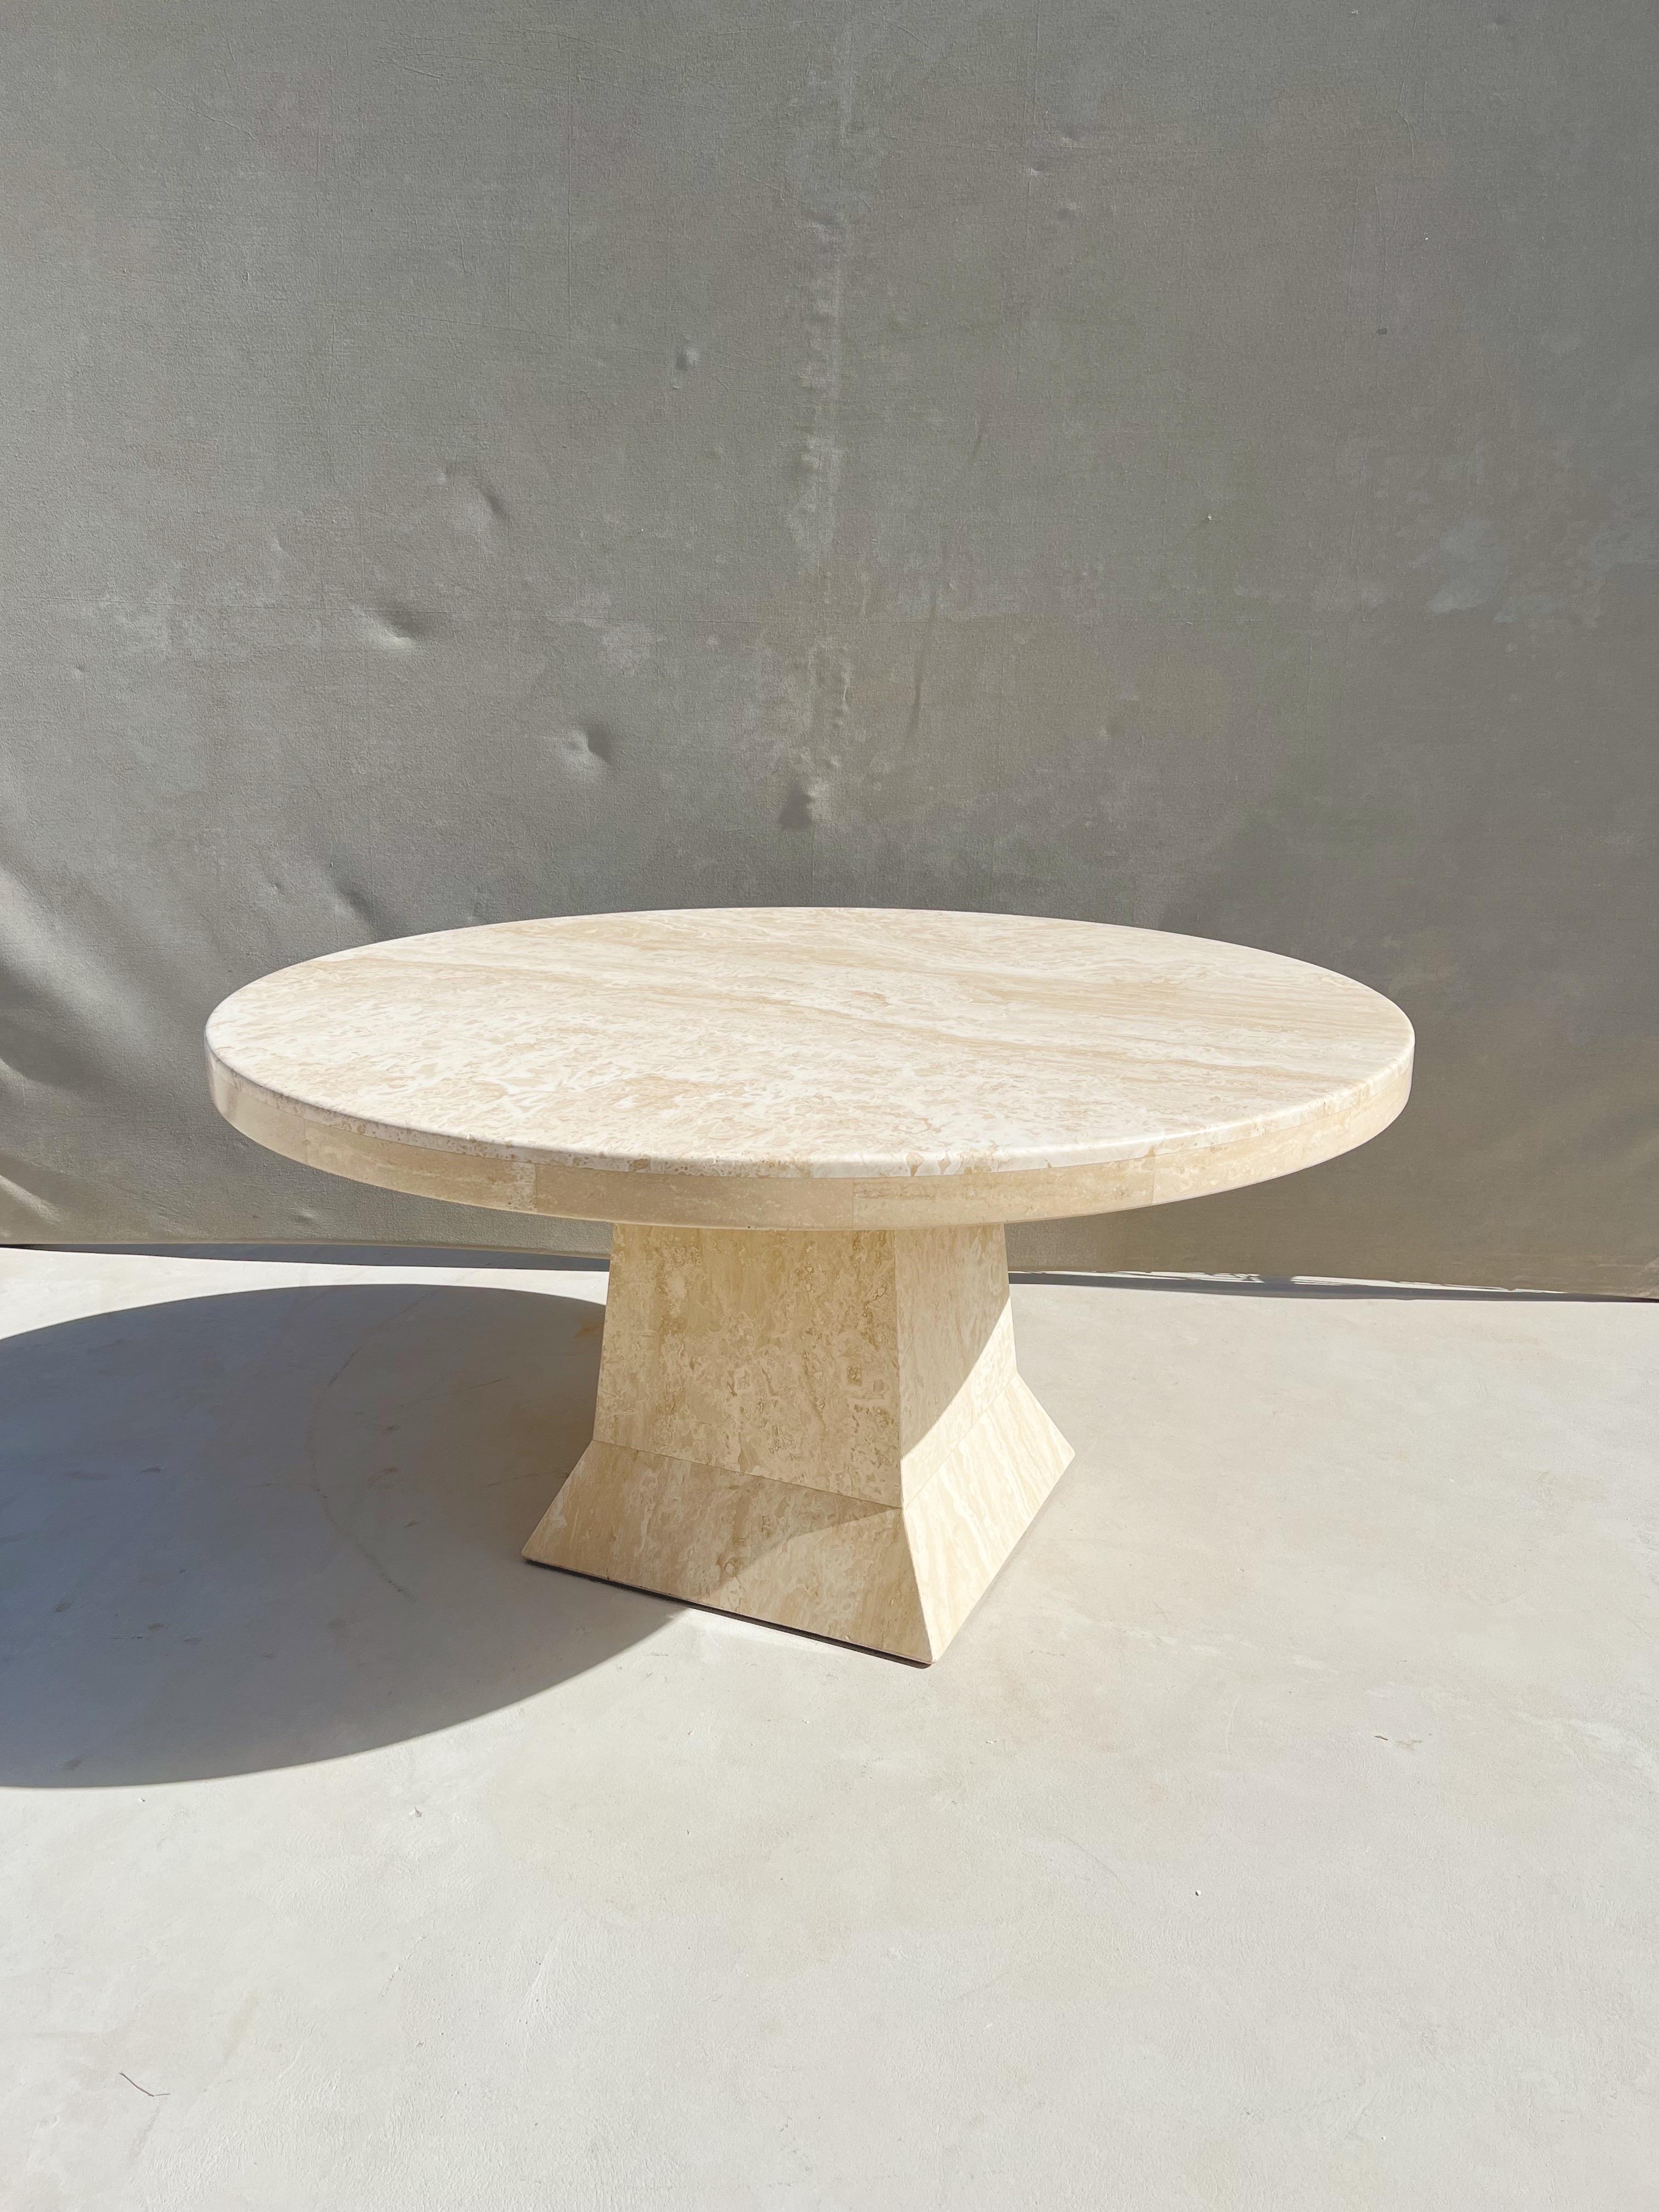 Vintage Modern Italian Travertine round dining table with a sculptural base

An exquisite and monumental Italian travertine round dining table, showcasing a light colored, glowing travertine and a strong sculptural pedestal base

This Italian